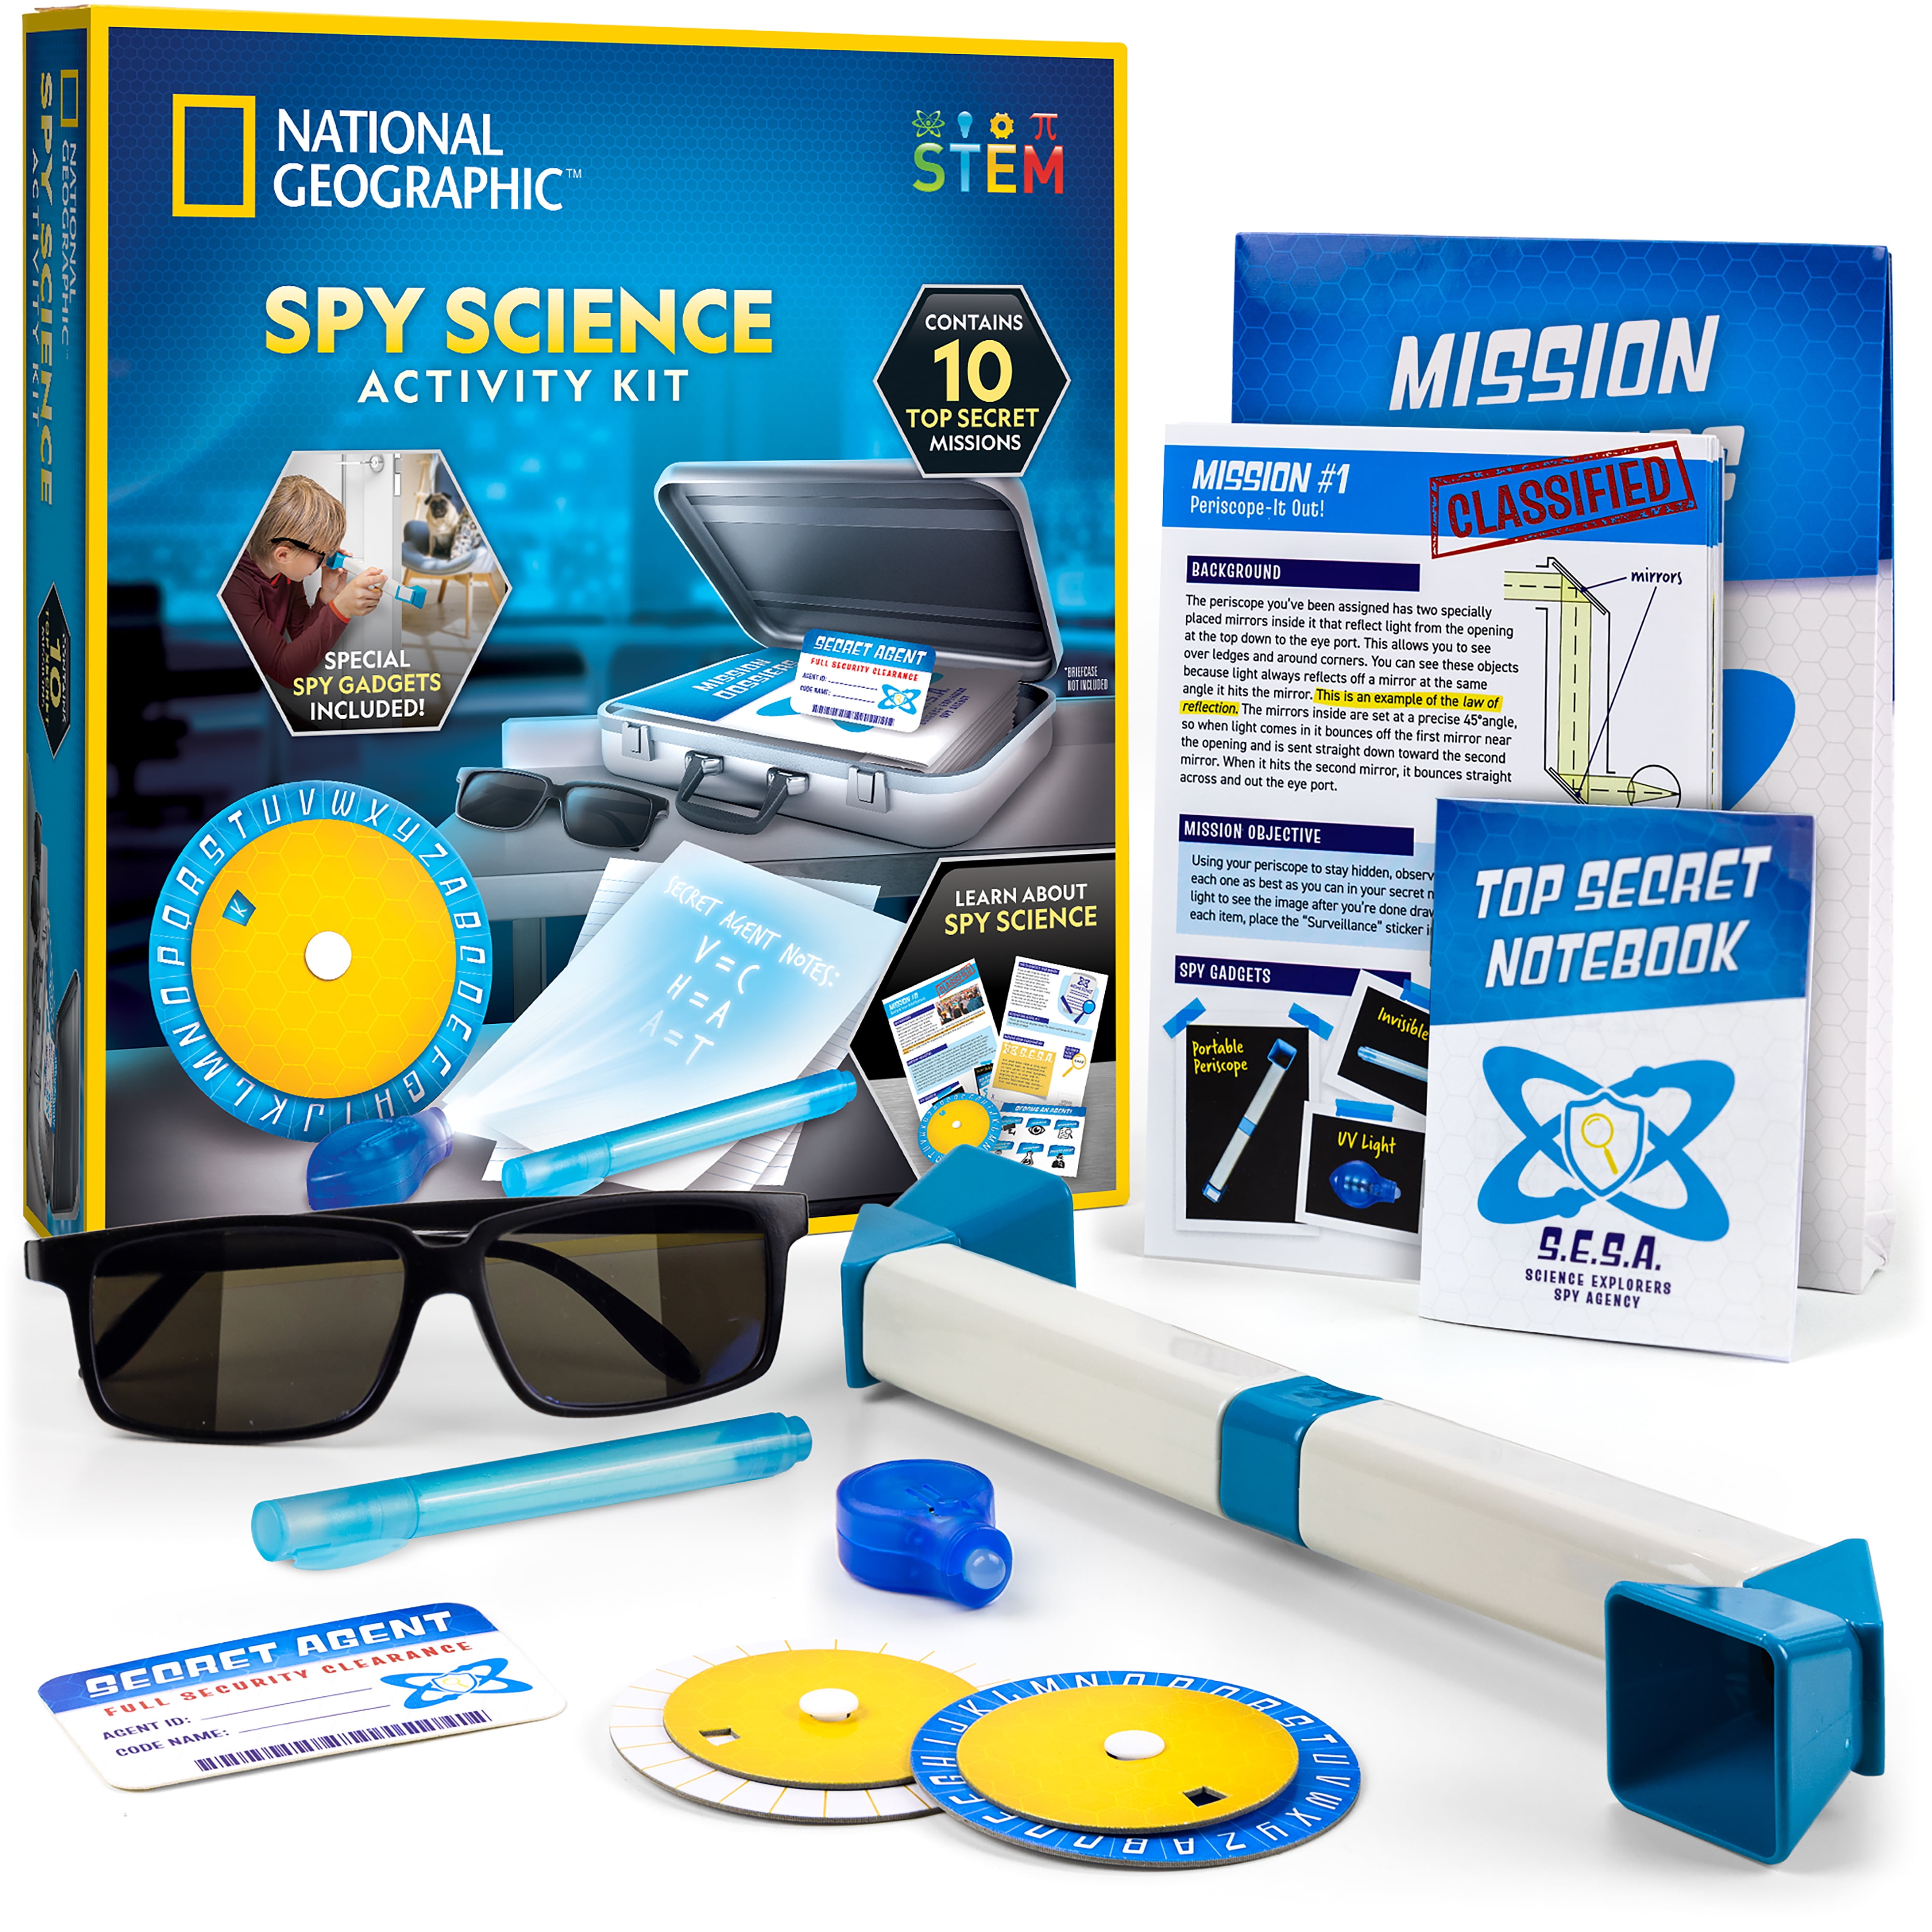 NATIONAL GEOGRAPHIC Spy Science Kit - Kids Spy Activity Set, Complete 10  Secret Spy Missions with Spy Gadgets and Spy Gear, Detective Kit, Pretend  Play 